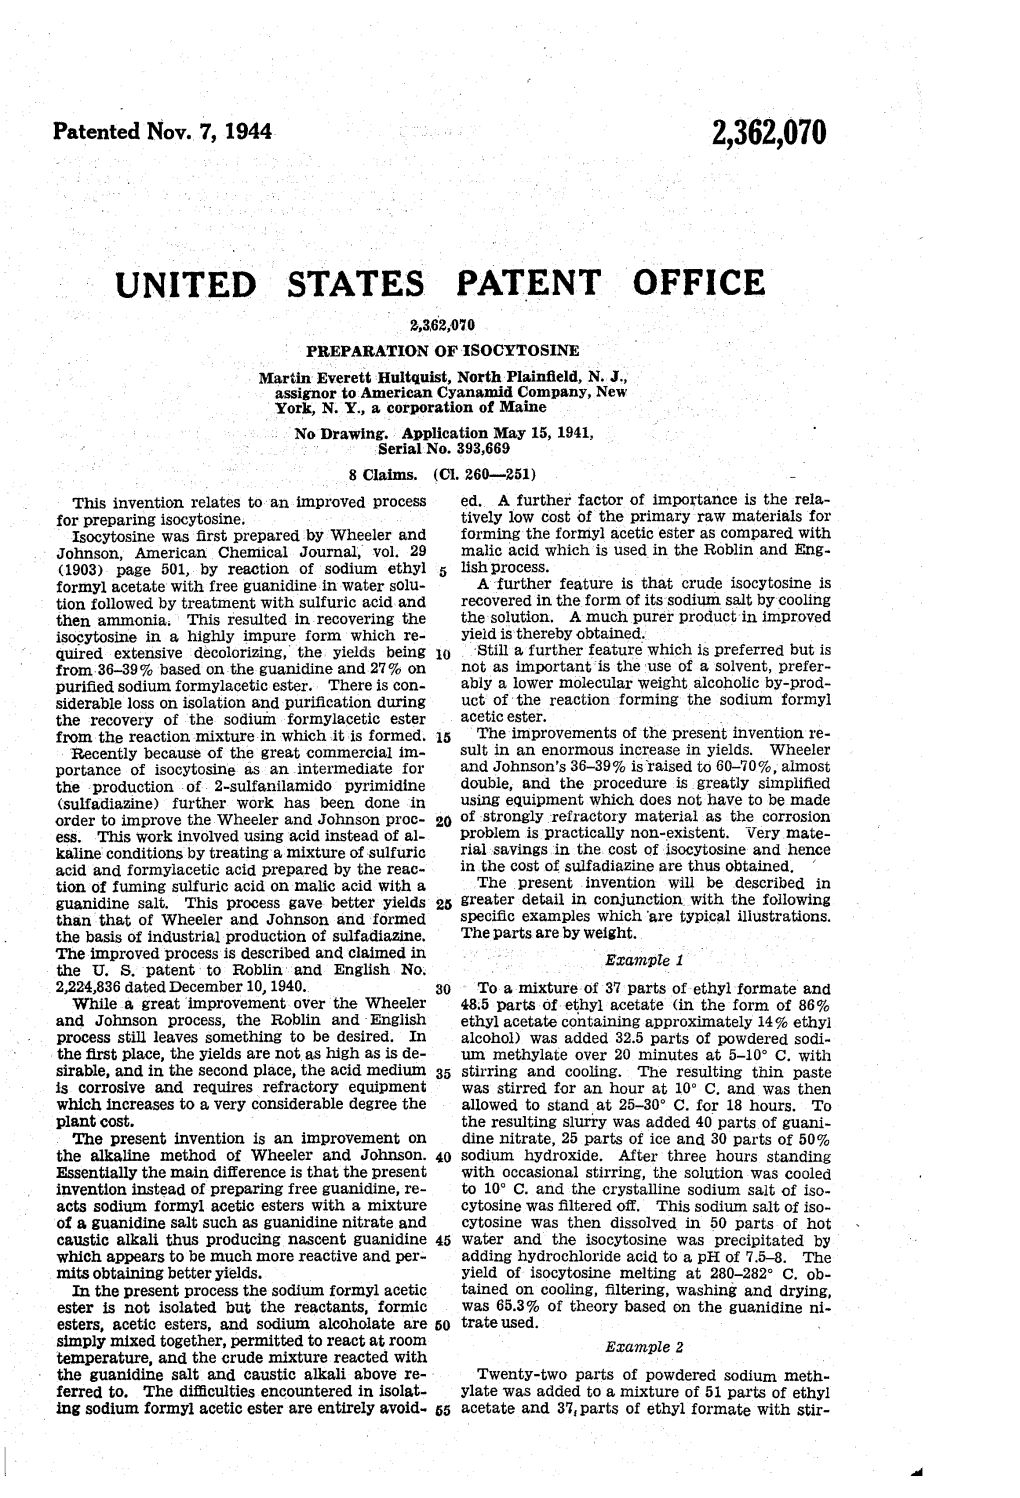 UNITED STATES PATENT OFFICE PREPARATION of SOCYTOSENE Martin Everett Hultquist, North Plainfield, N.J., Assignor to American Cyanamid Company, New York, N